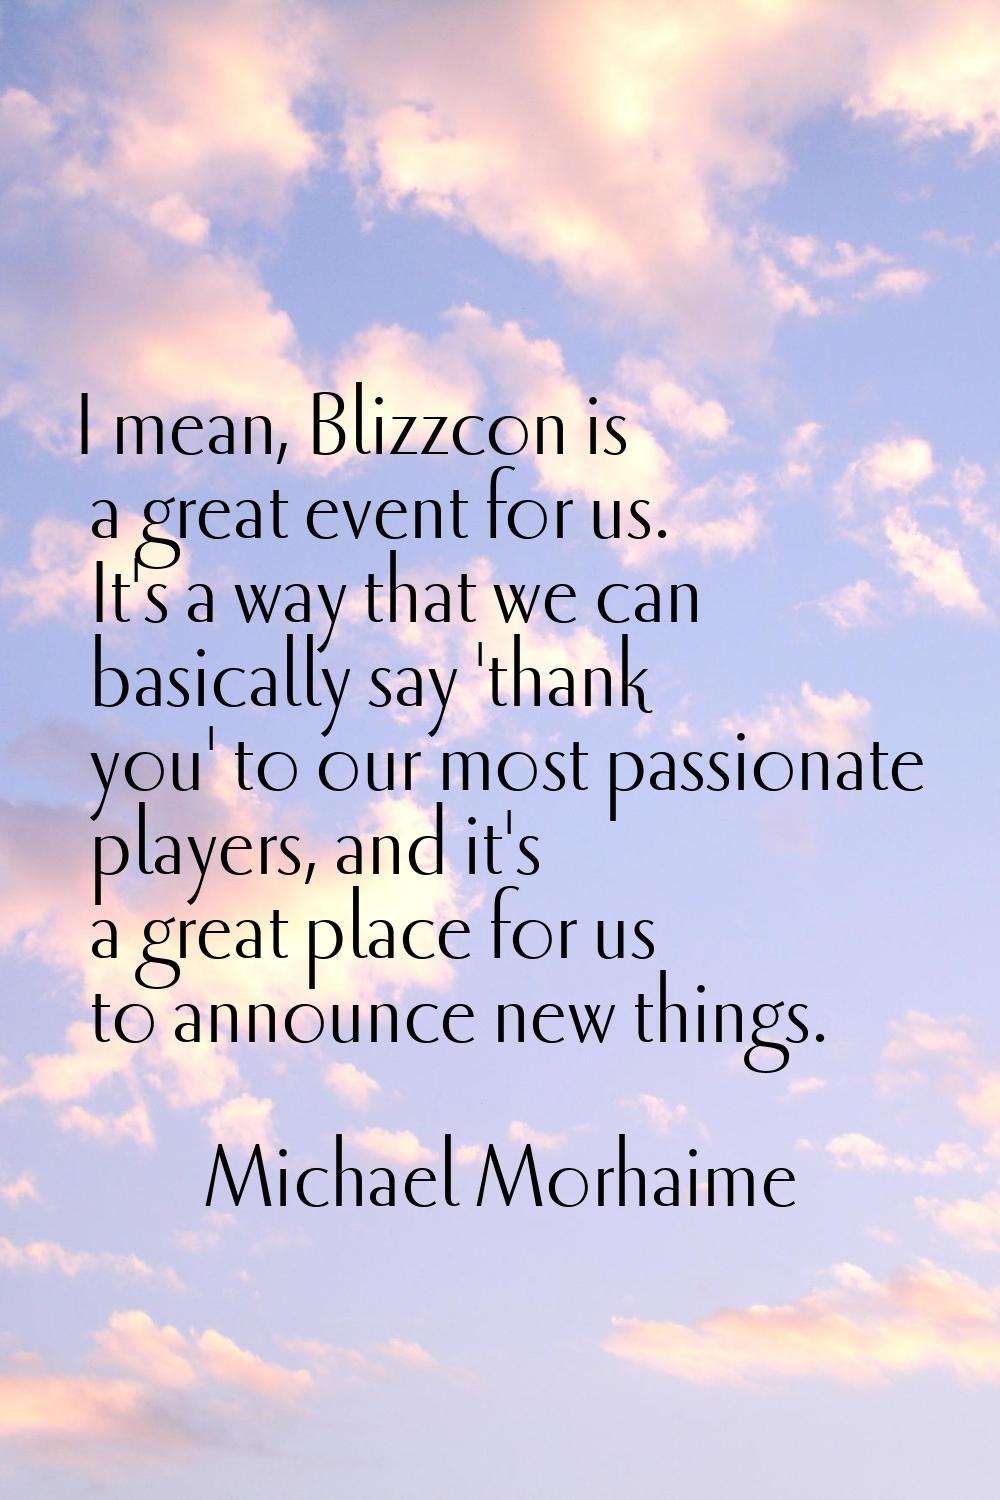 I mean, Blizzcon is a great event for us. It's a way that we can basically say 'thank you' to our m